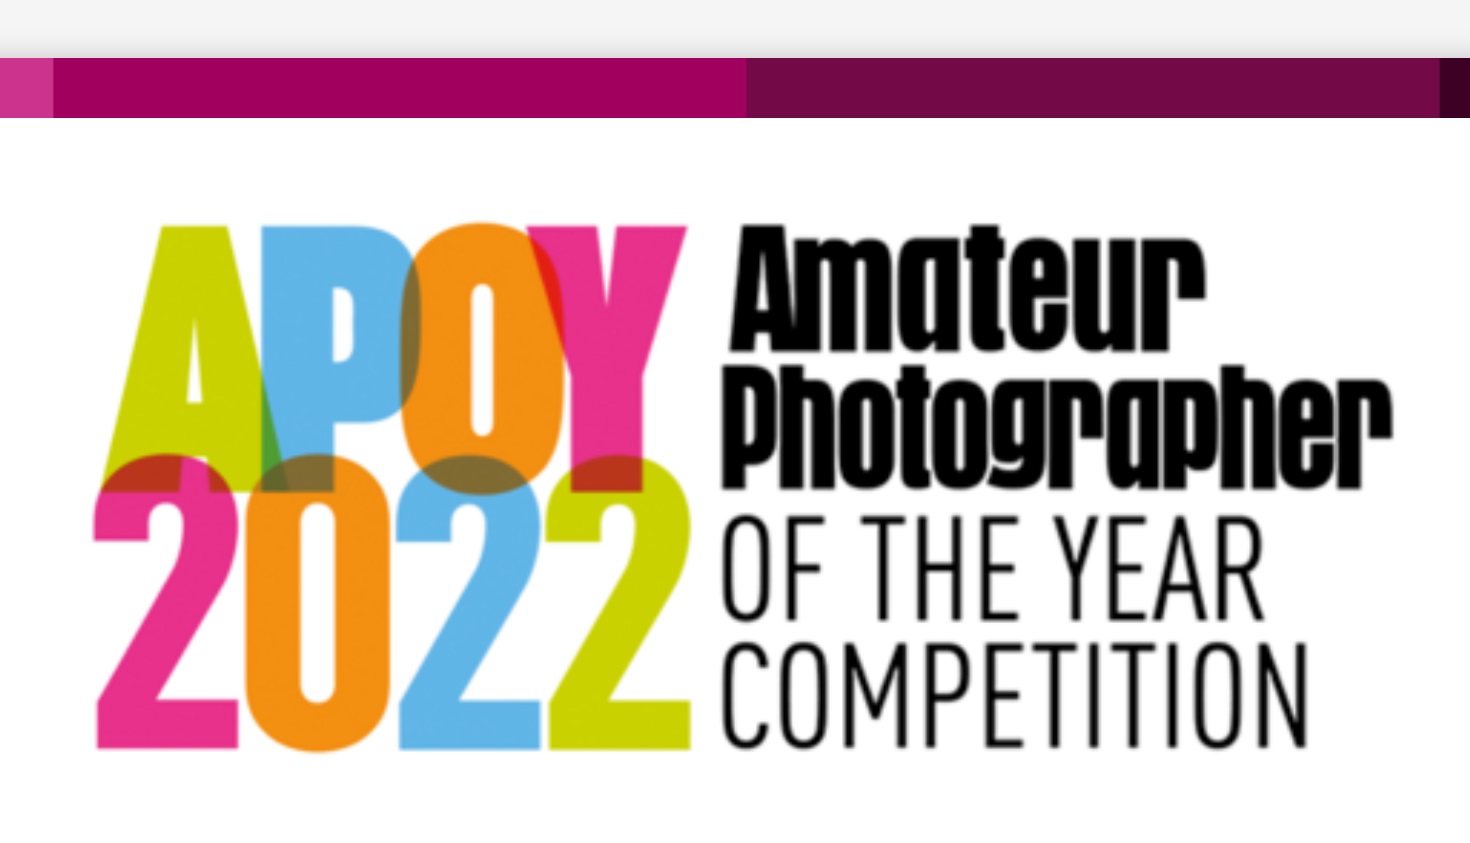 APOY Amateur Photographer of the Year 2022 - logo